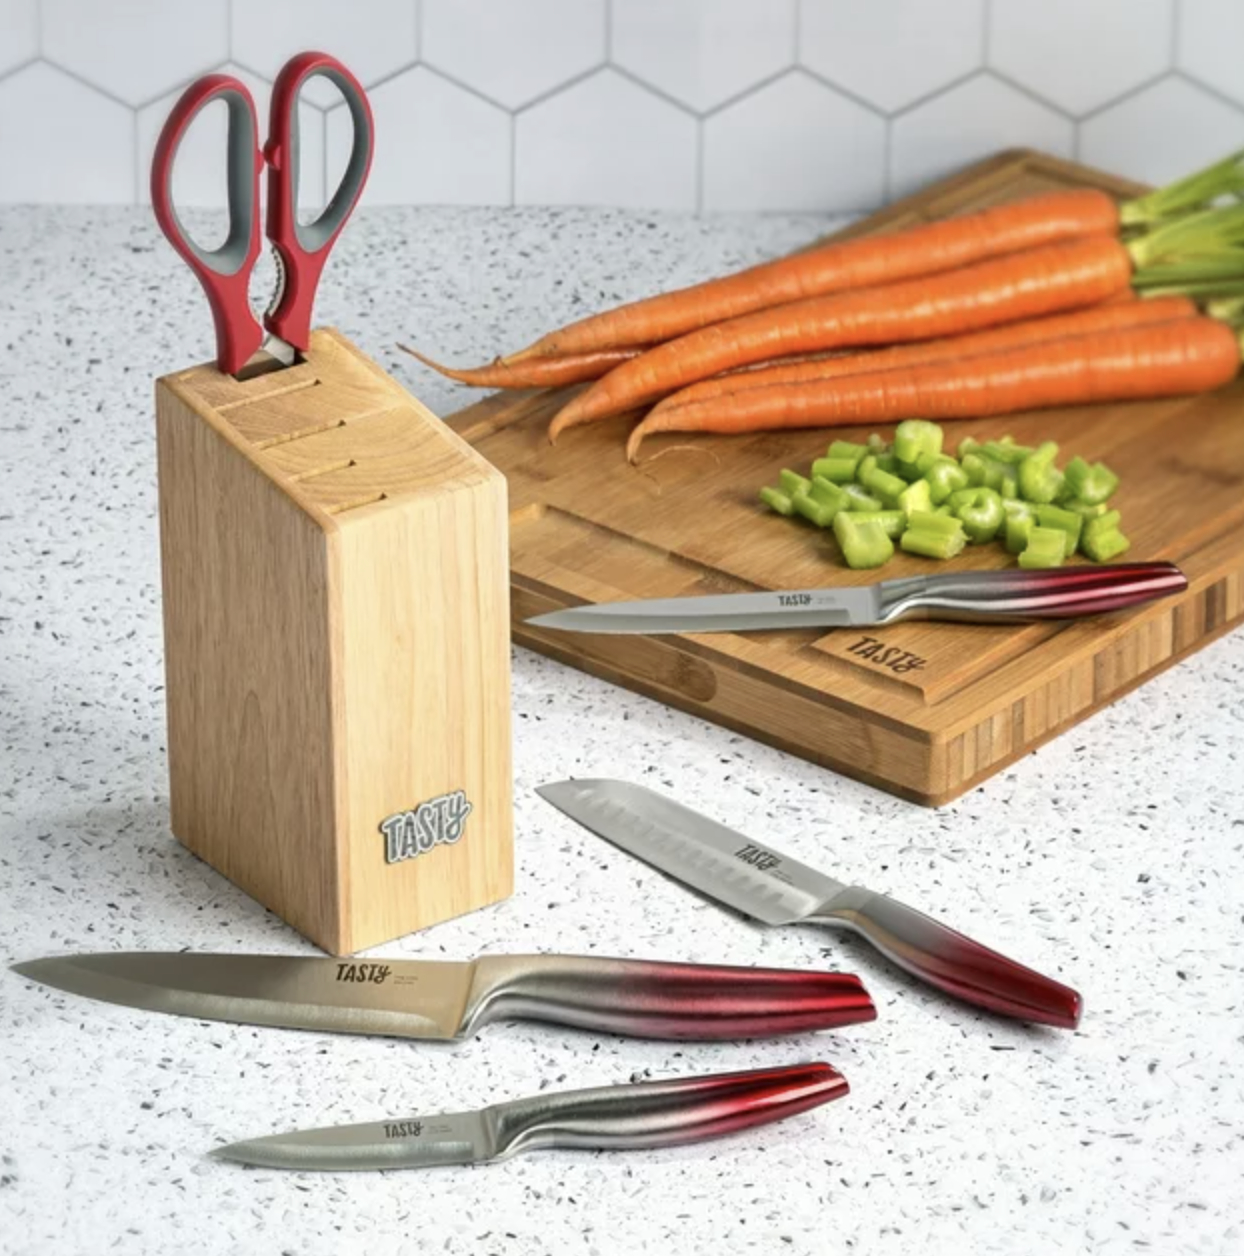 The knife block set on counter with knives spread out